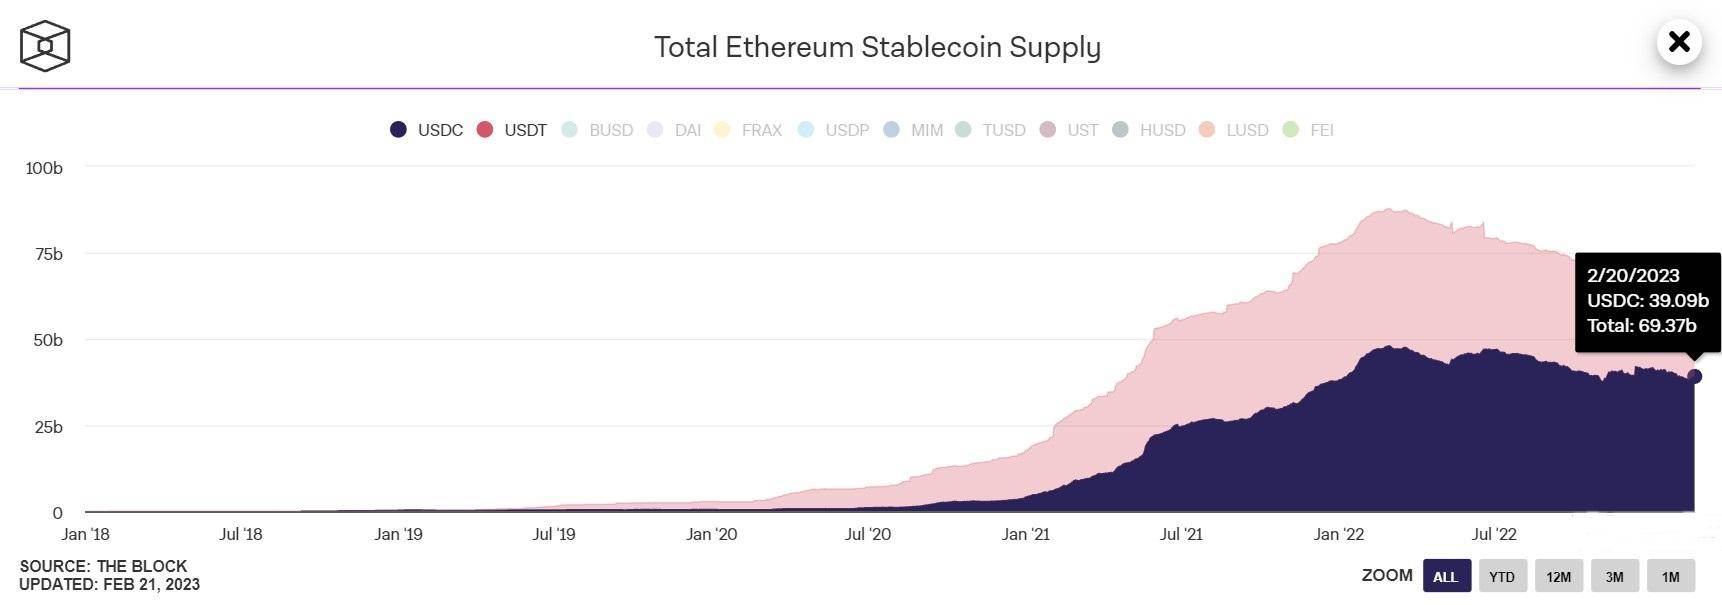 total ethereum stablecoin supply